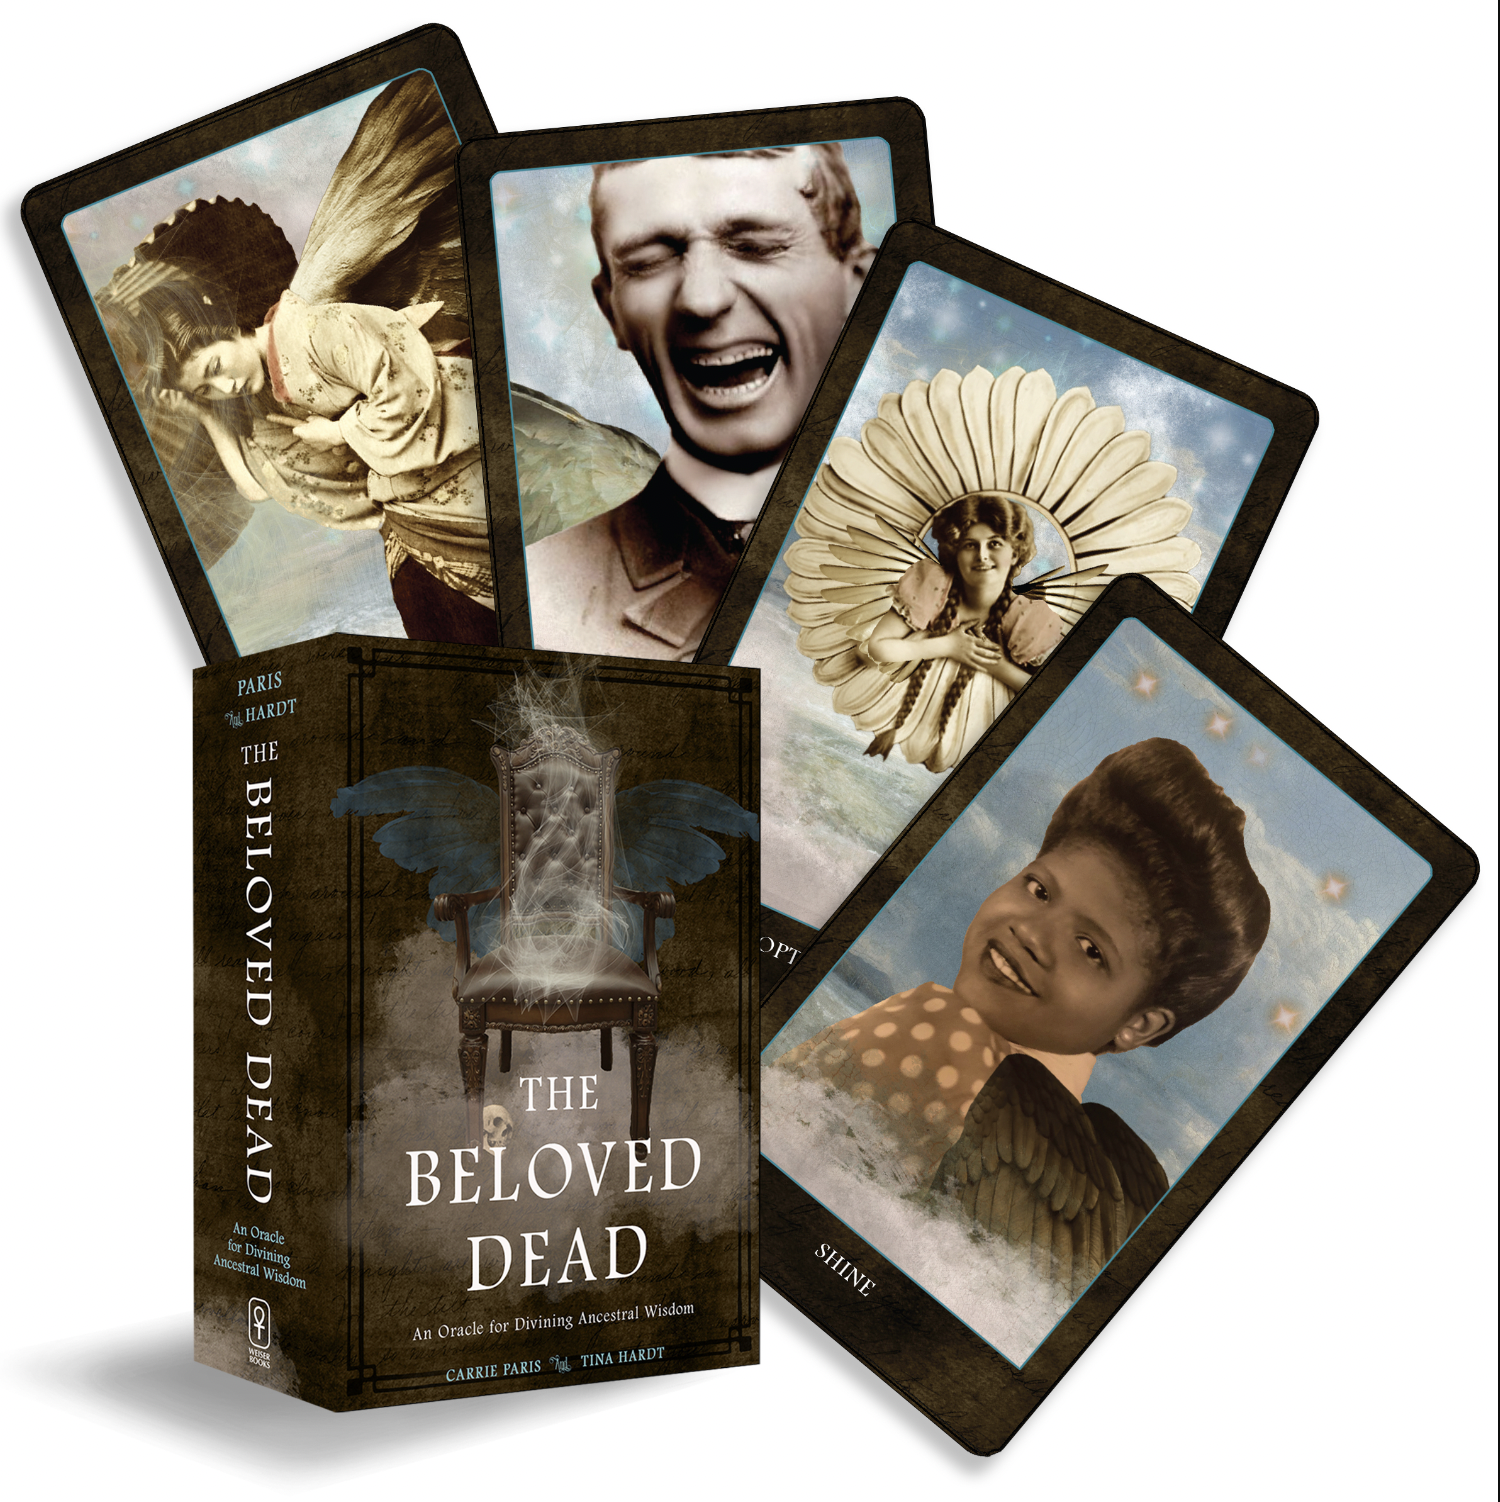 The Beloved Dead: An Oracle for Divining Ancestral Wisdom by Carrie Paris and Tina Hardt